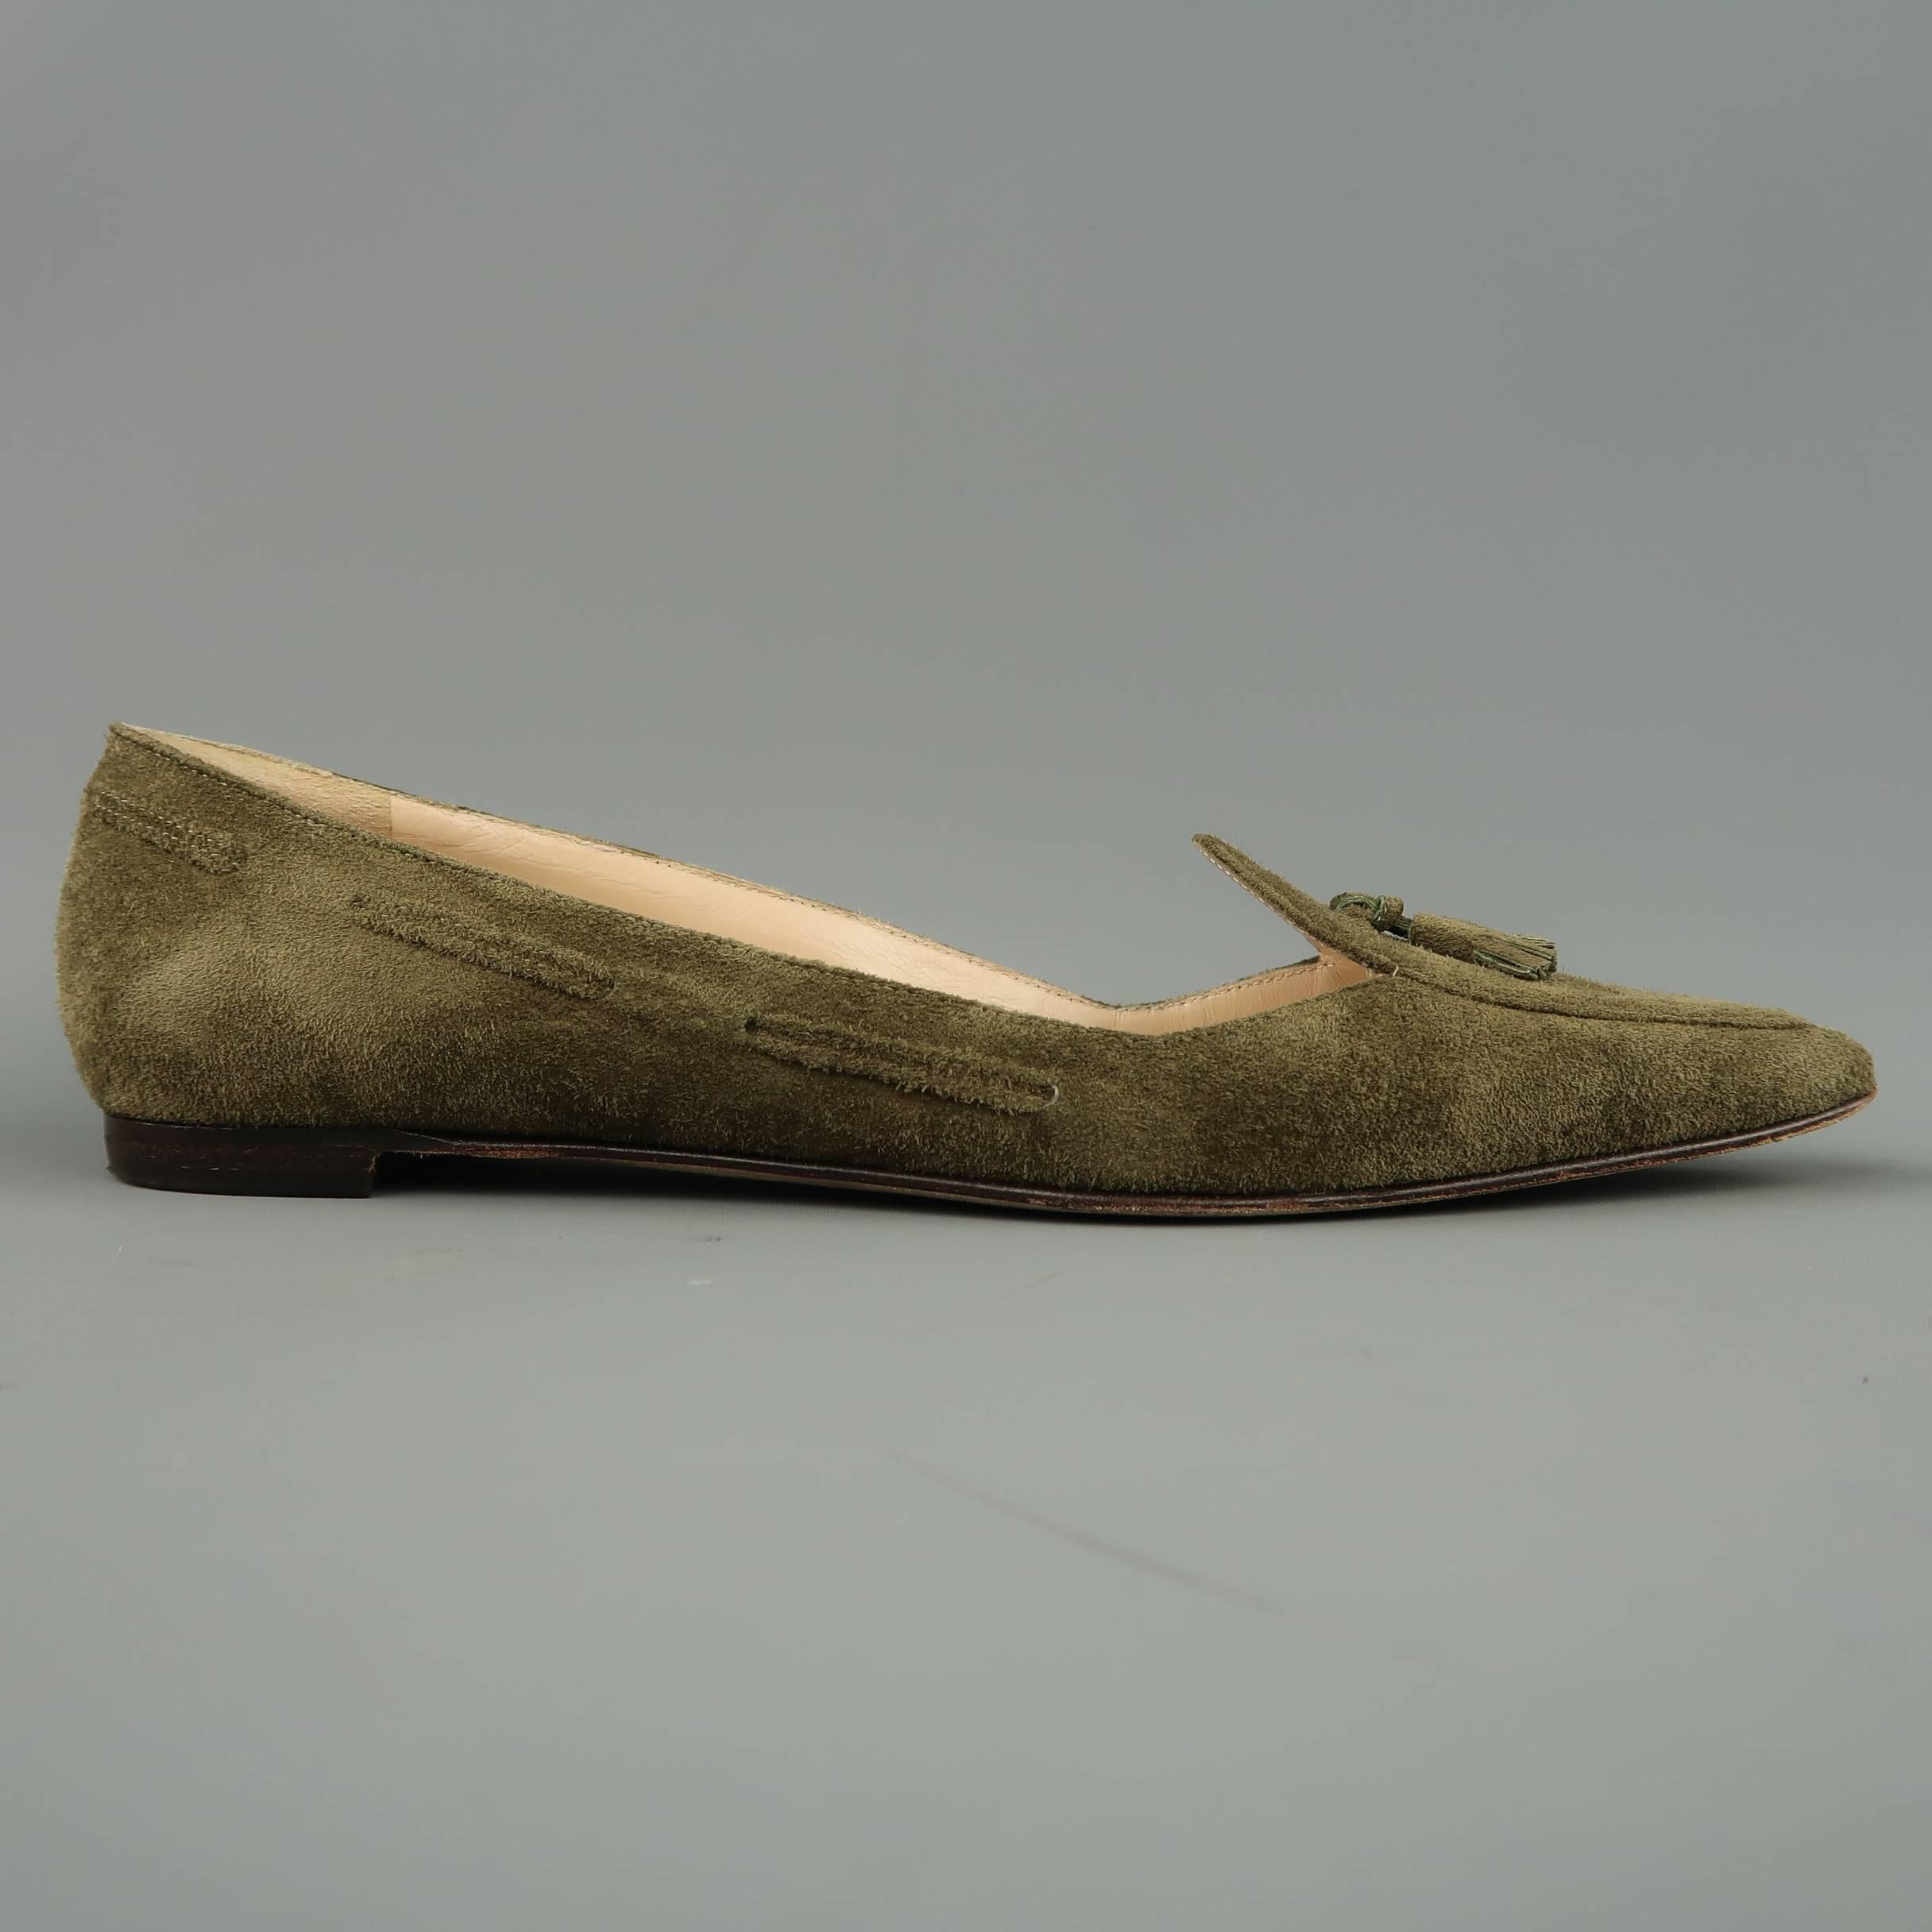 MANOLO BLAHNIK loafer flats come in olive green textured suede with a pointed apron toe, detailed with tassels, and woven piping. Made in Italy.
 
Good Pre-Owned Condition.
Marked: IT 35   Retails at: $515
 
Measurements:
 
Outsole: 10 x 3 in